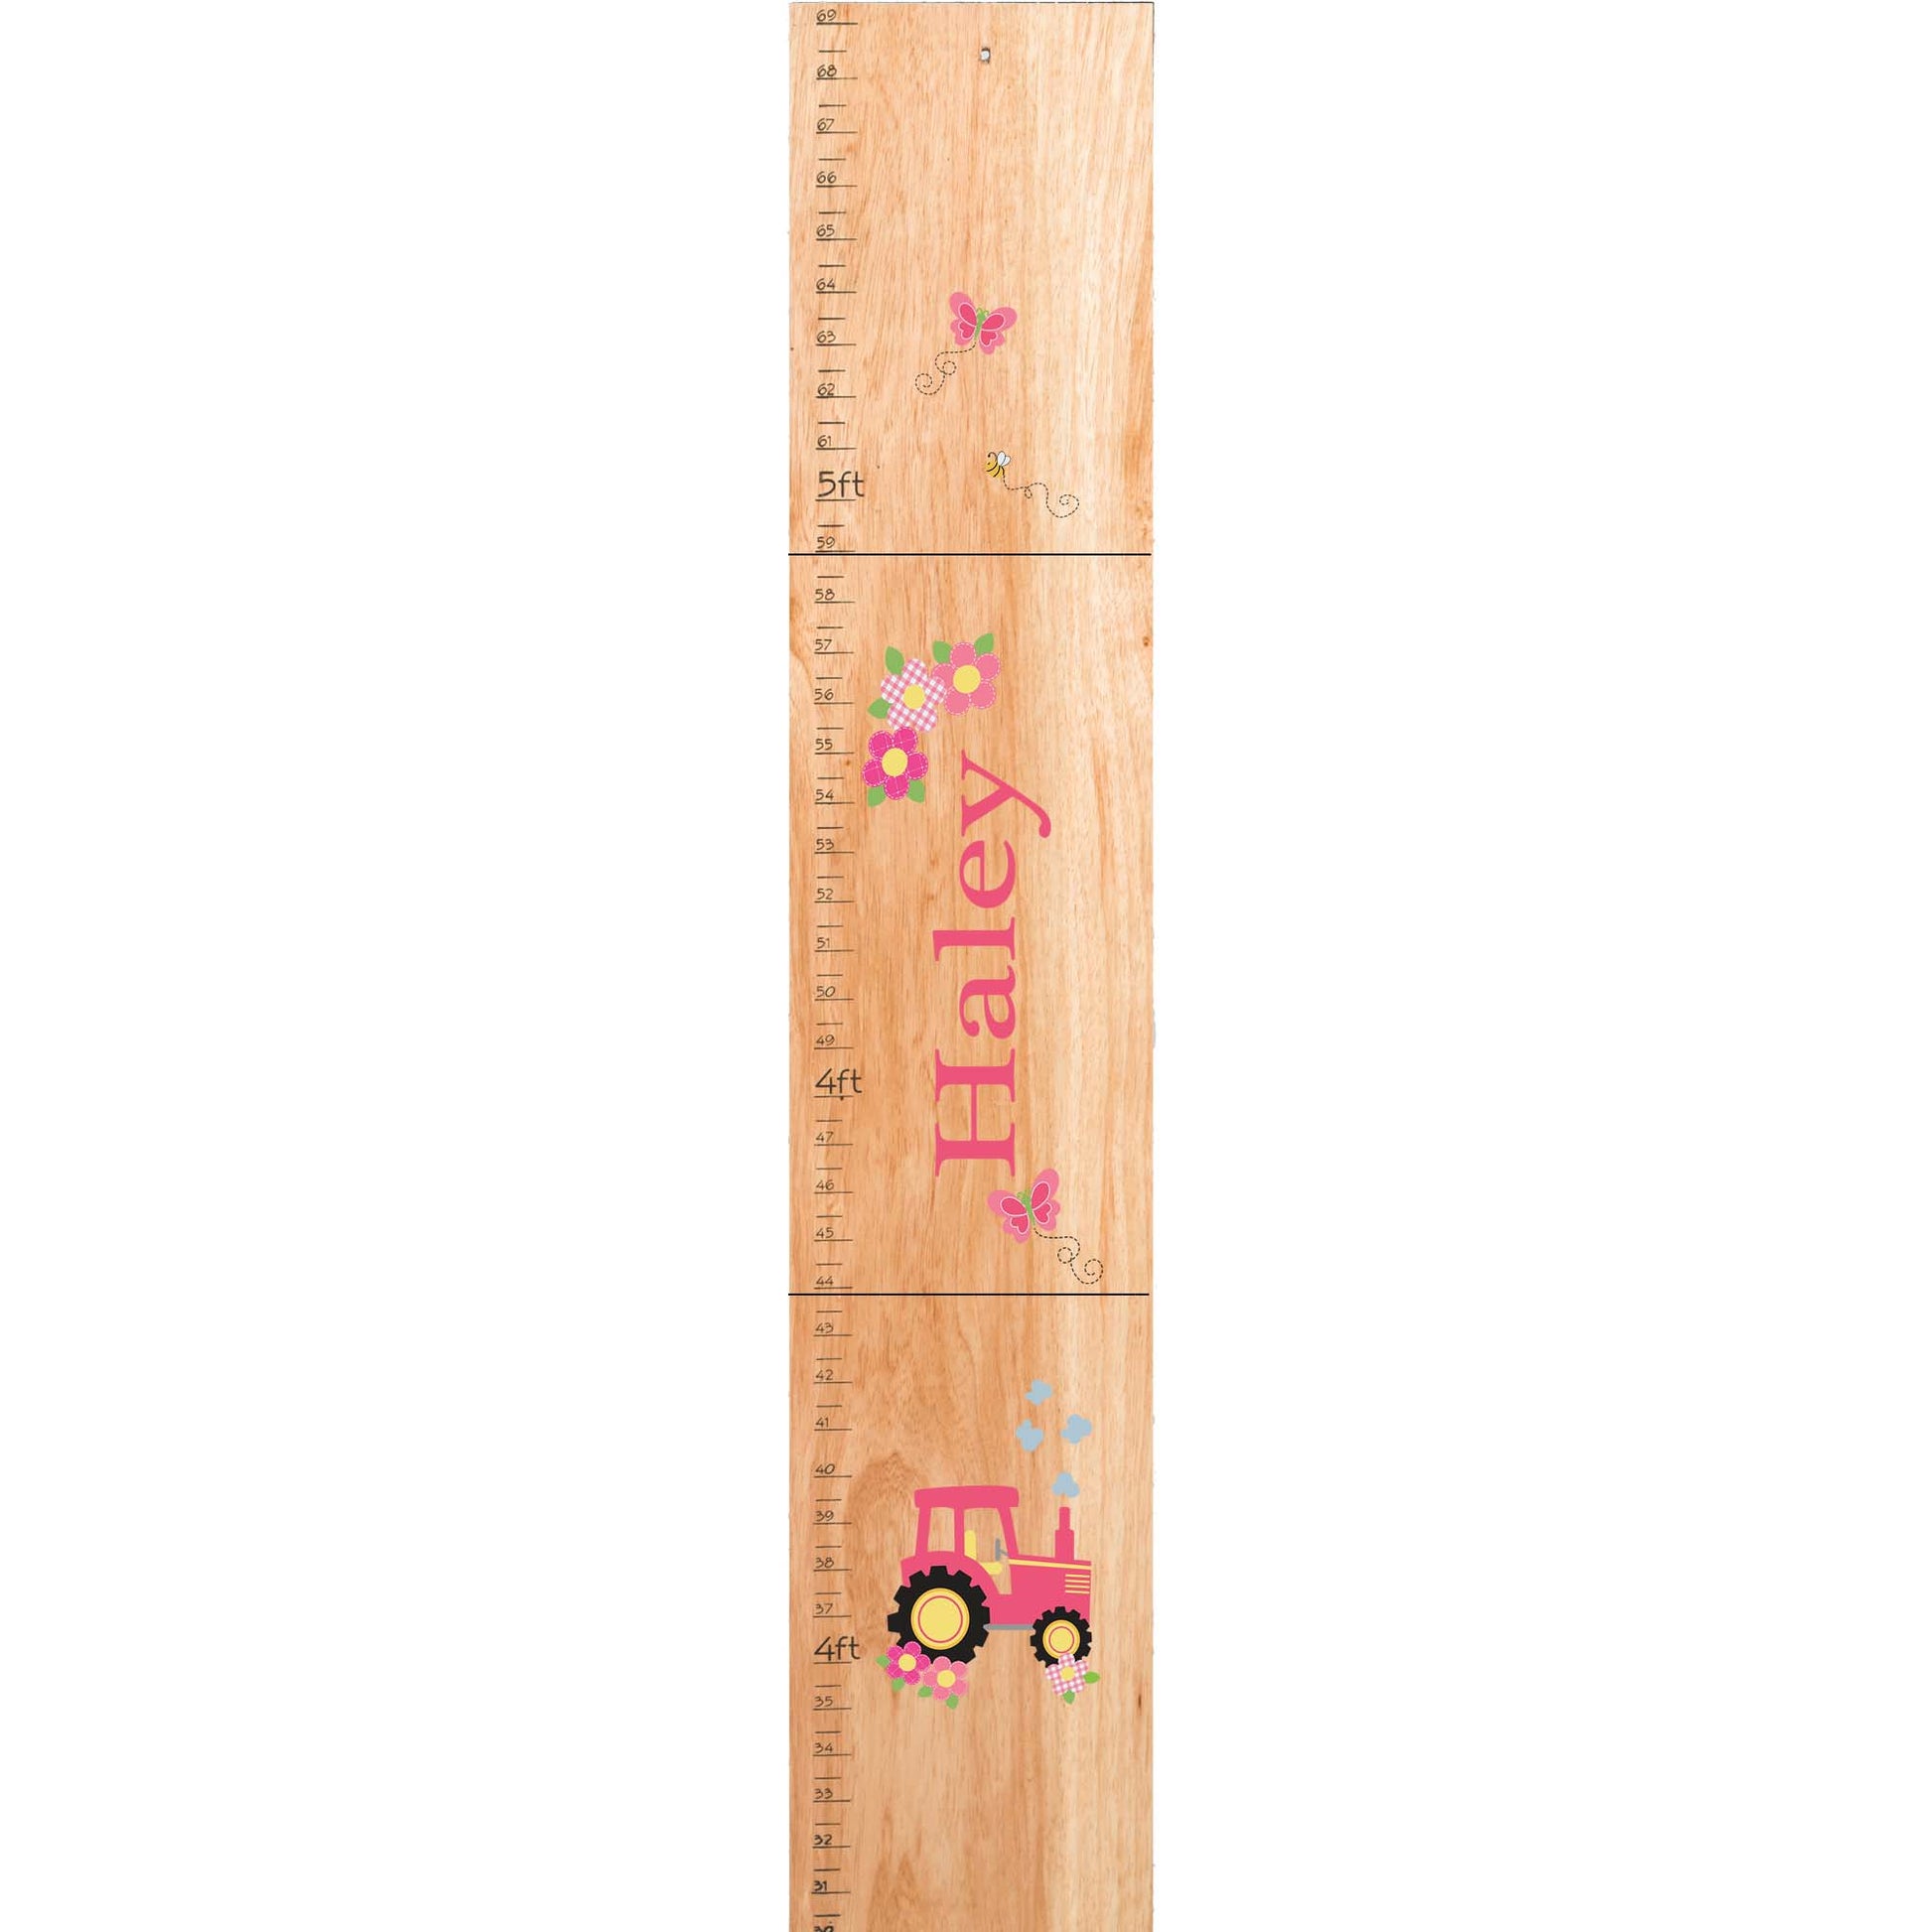 Personalized Natural Growth Chart With Rock Star Blue Design